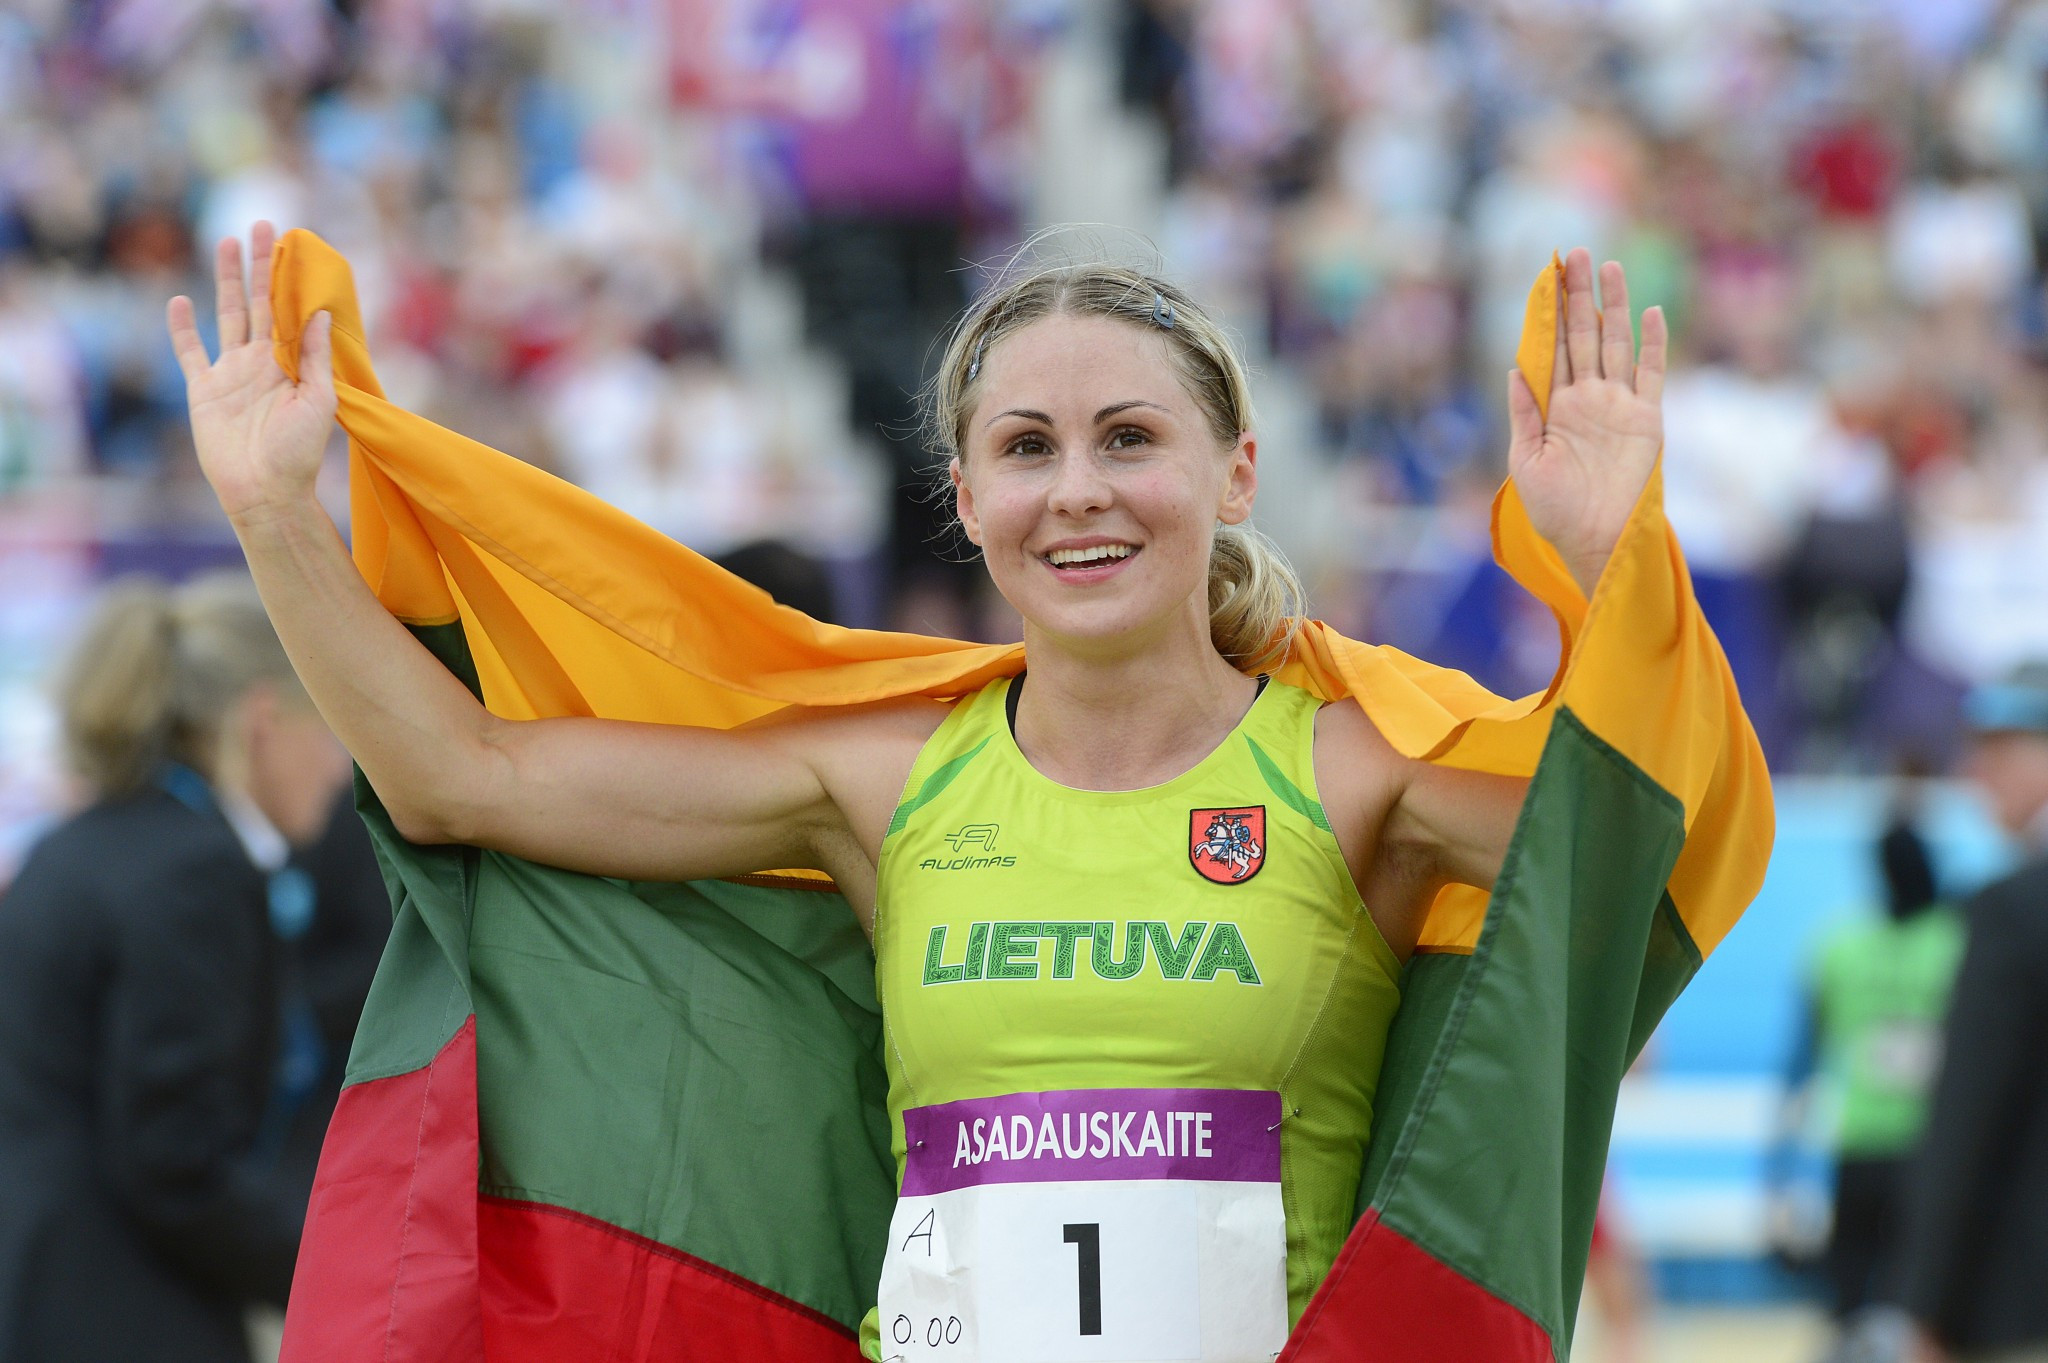 Reigning European and Olympic champion Laura Asadauskaite progressed through to the final ©Getty Images